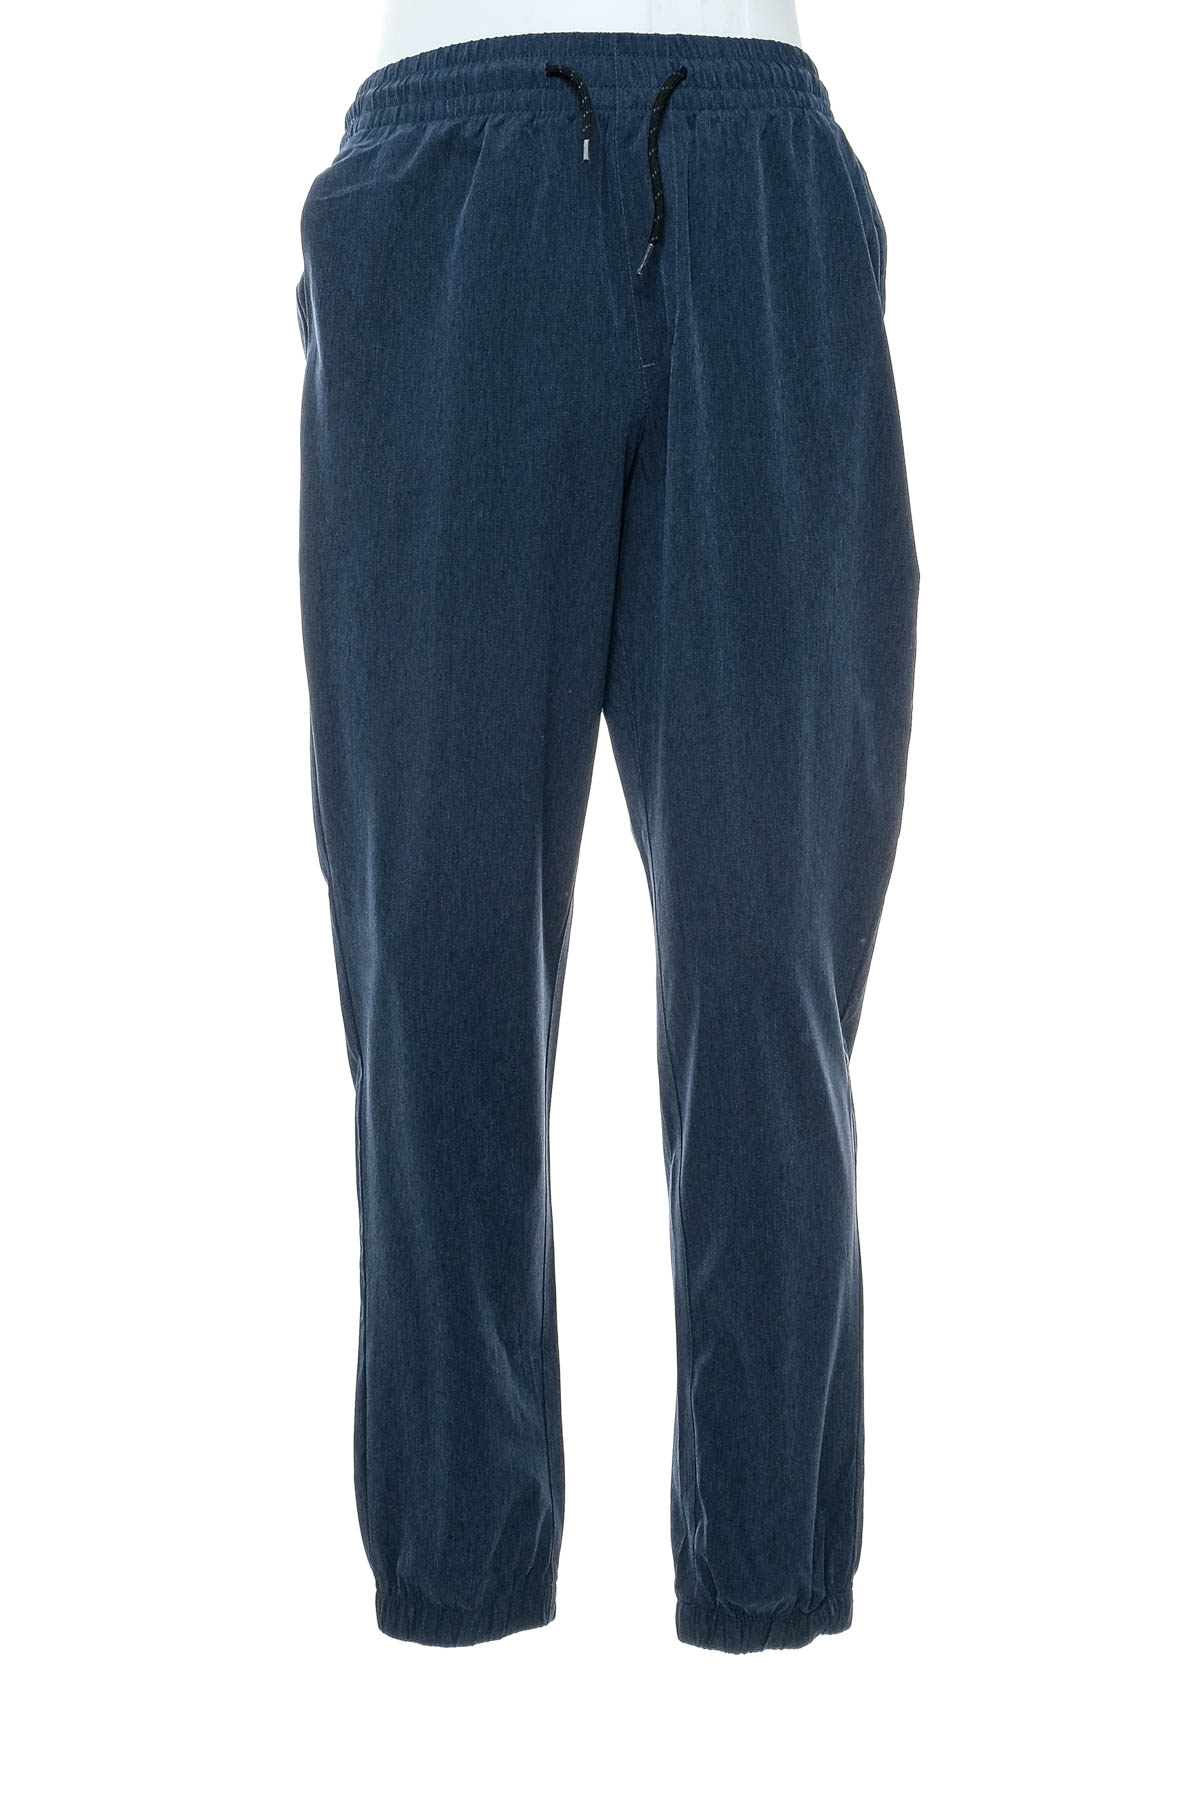 Male sports wear - OLD NAVY ACTIVE - 0